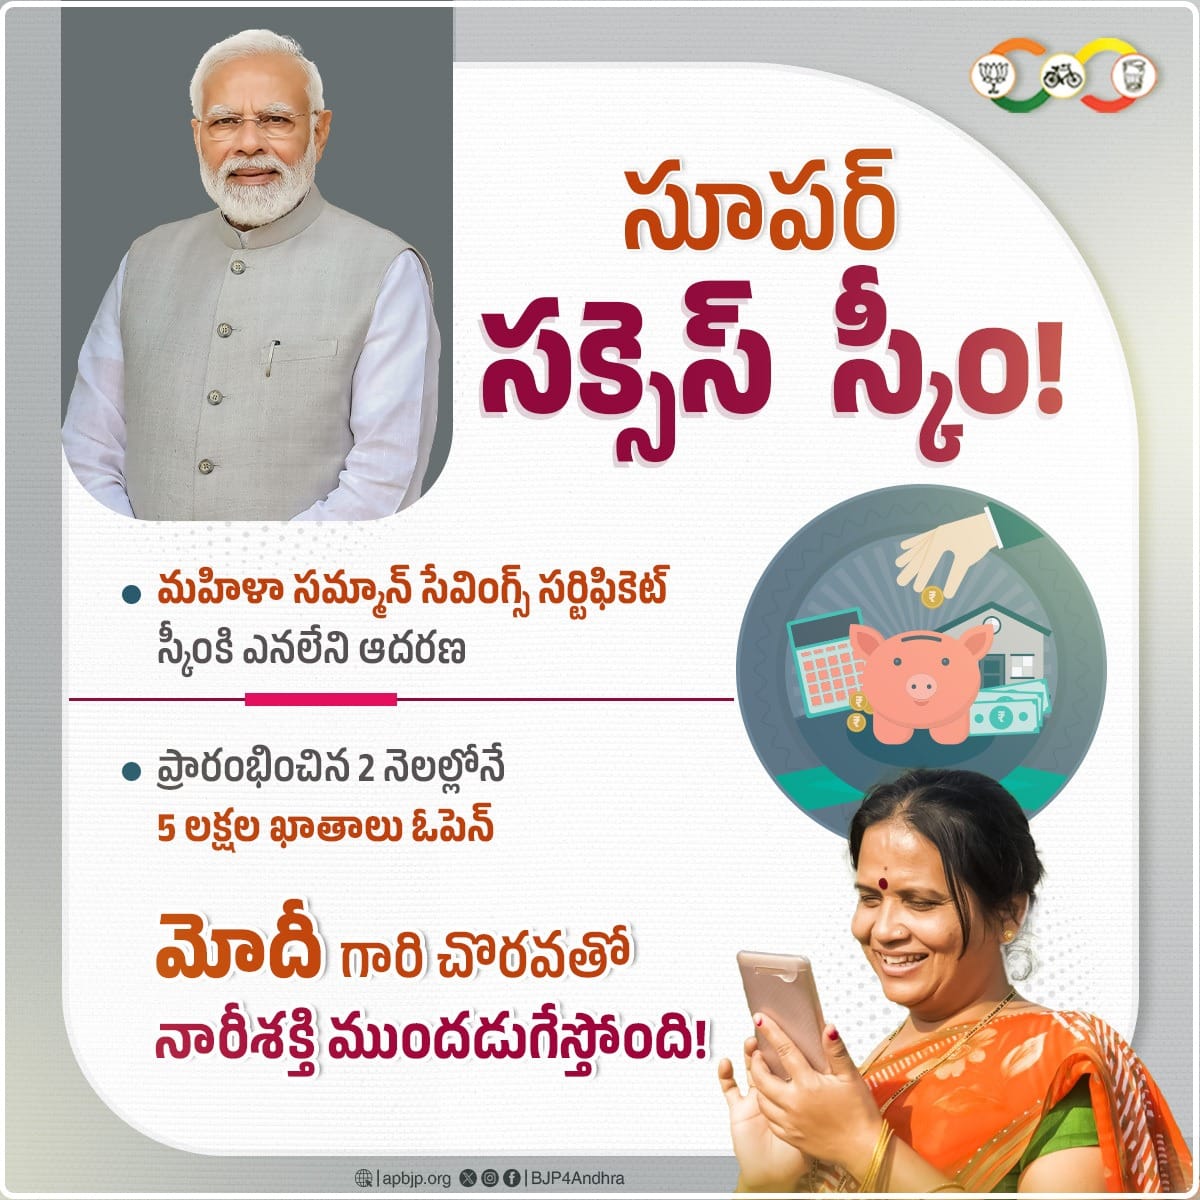 Empowering women! BJP aims to create 3 crore Lakhpati Didis by integrating SHGs with various sectors.
#Modi4ViksitAP